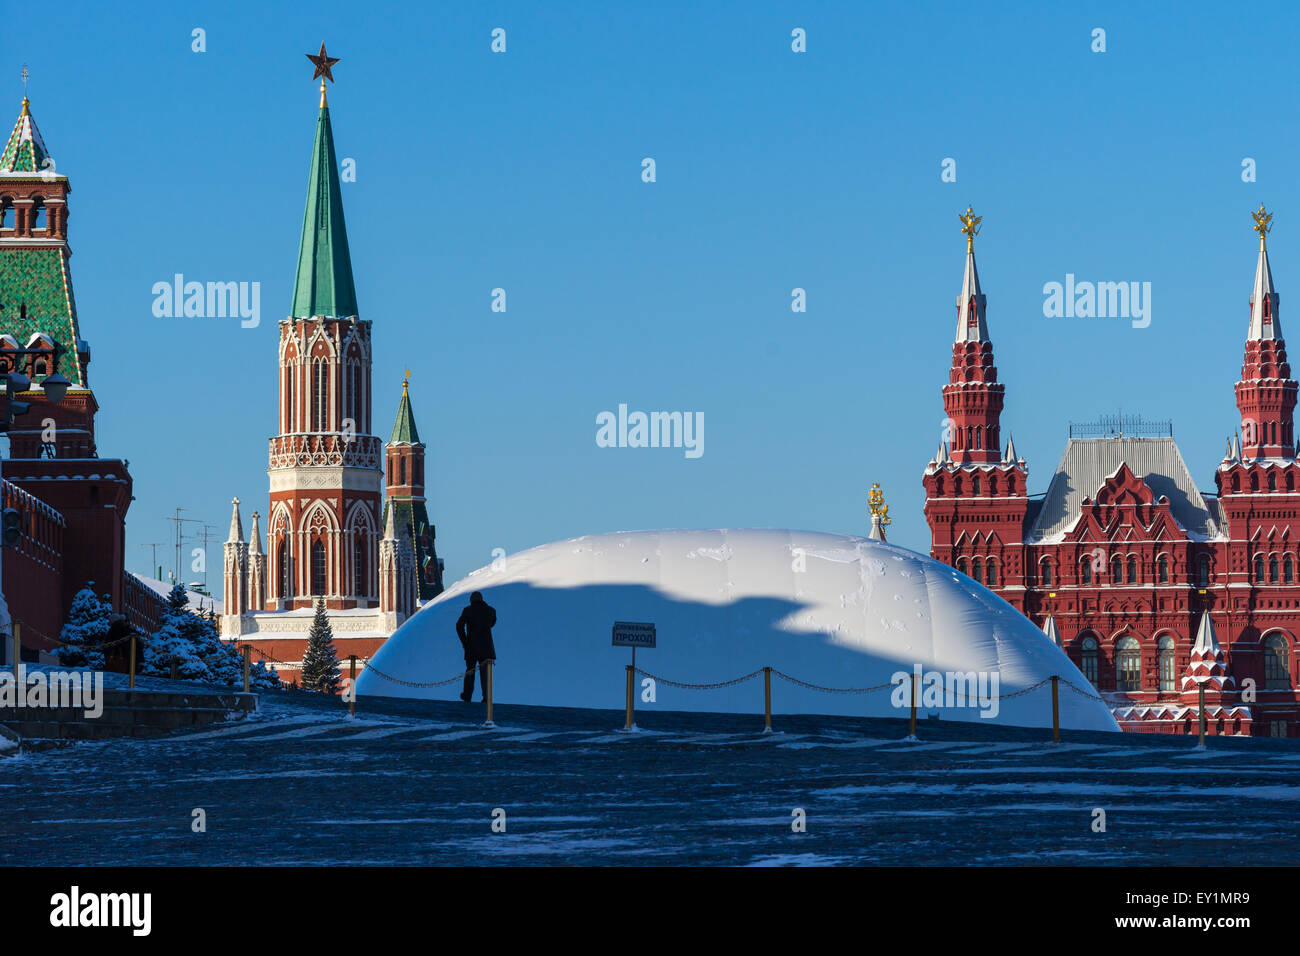 Moscow Red Square, Nikolsky tower of the Kremlin, protection cover over  Lenin's mausoleum Stock Photo